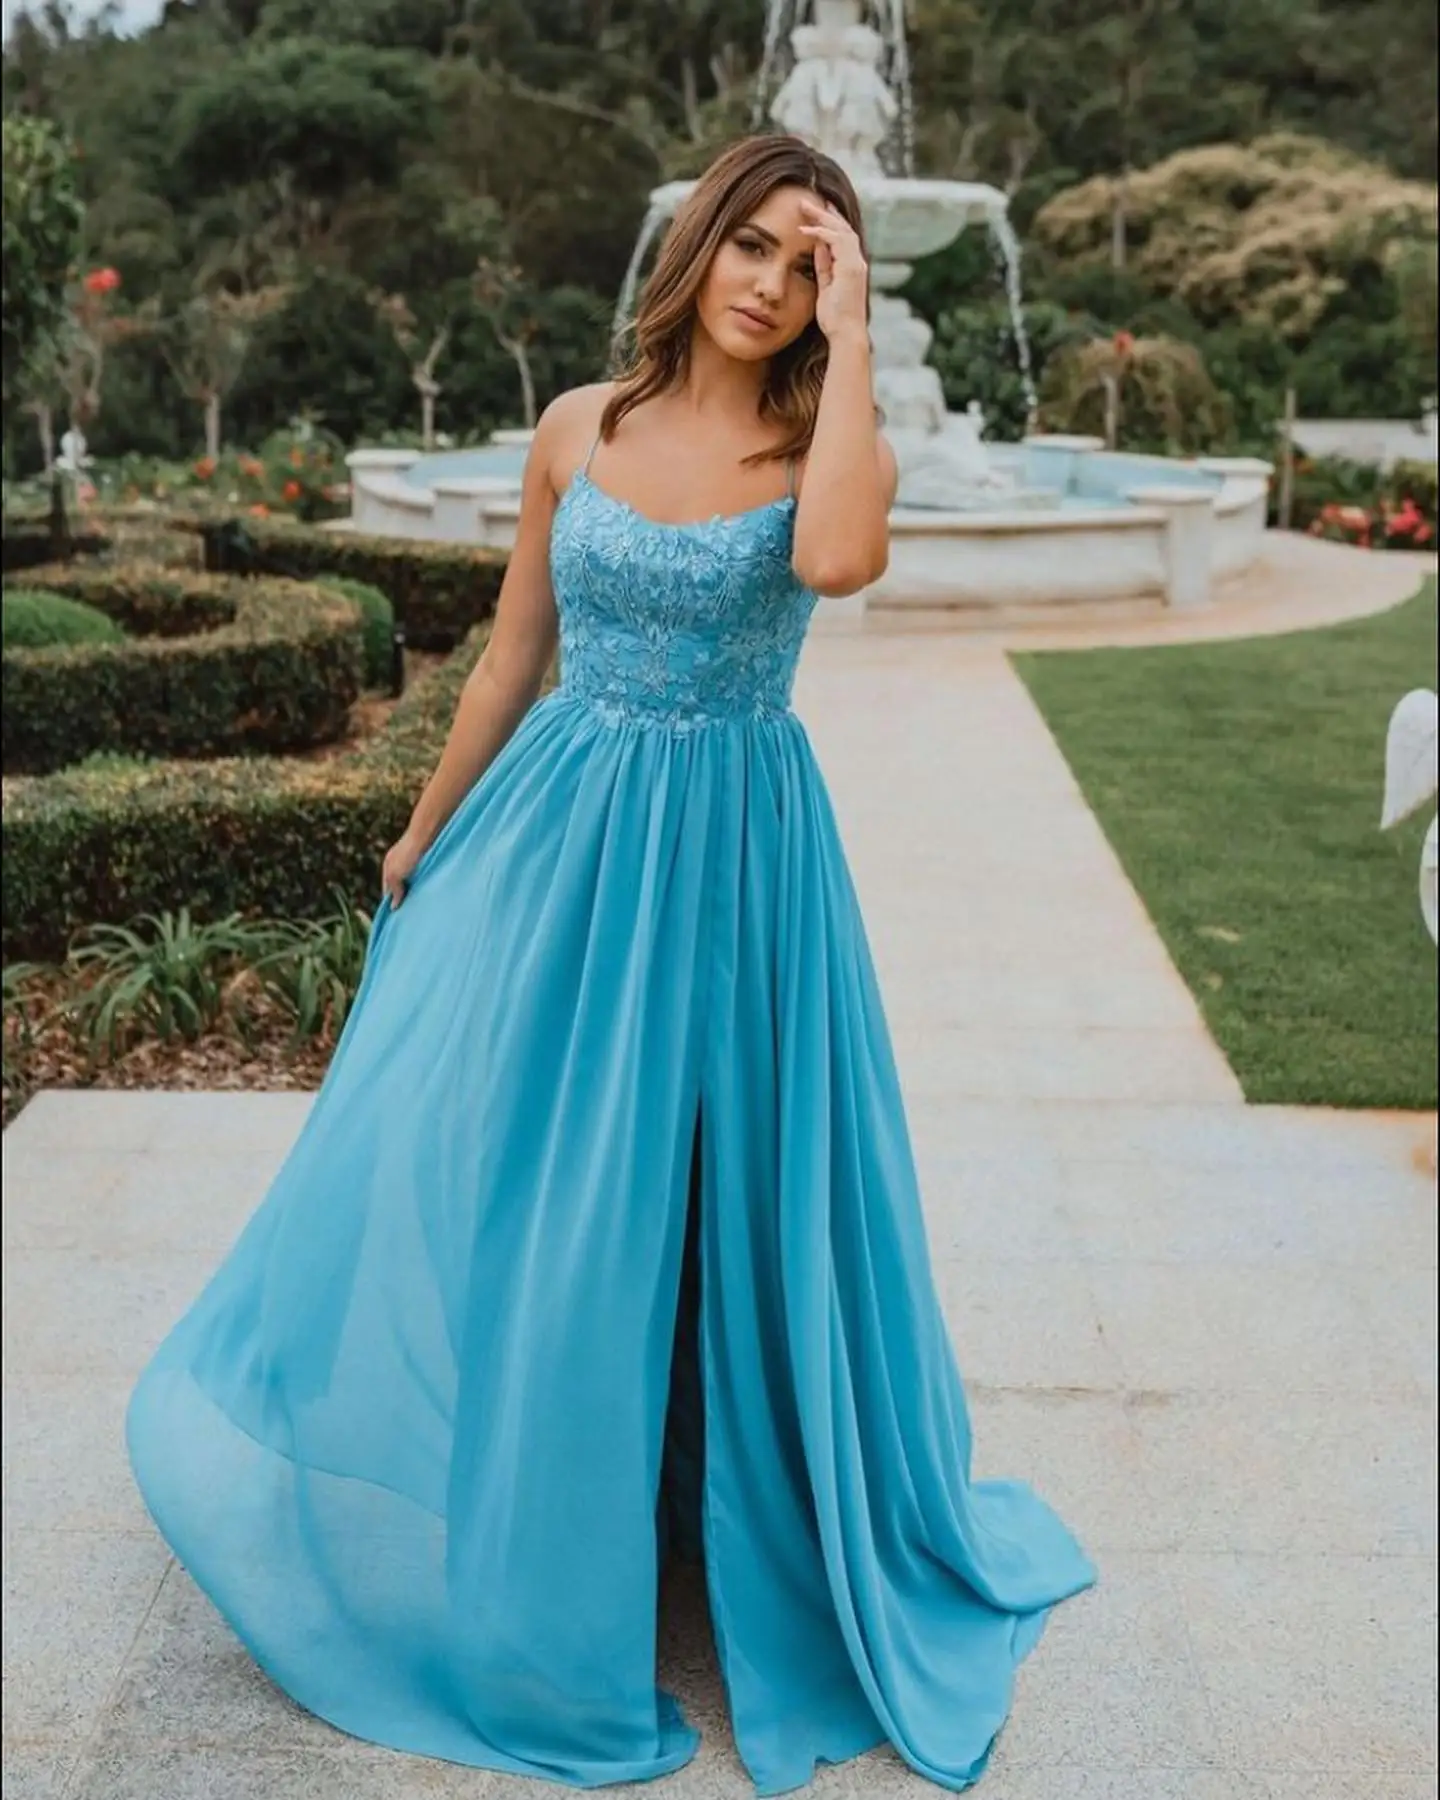 

Blue Straps Appliques Lace-Up Back Prom Dress Features Bodice with Floral A-Line Tulle Train Evening Dresses Wedding Dresses